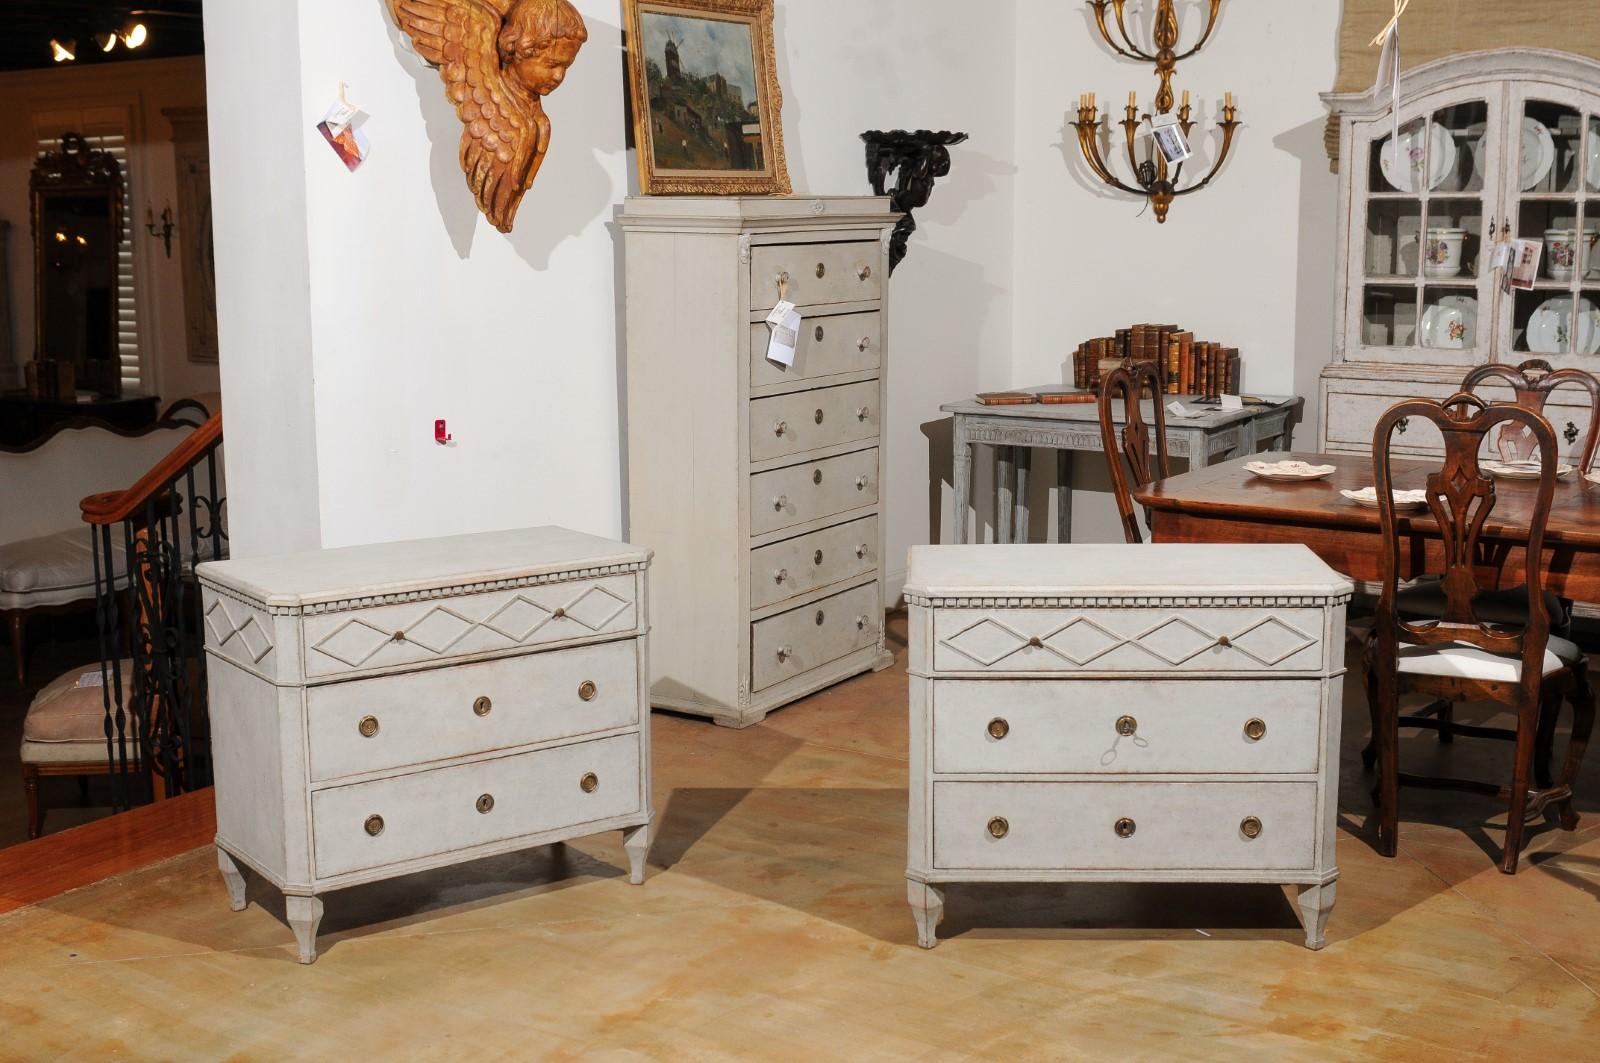 A pair of Swedish Gustavian style painted wood three-drawer chests from the 19th century, with dentil molding and diamond motifs. Created in Sweden during the 19th century, each of this pair of Gustavian style chests features a rectangular top with